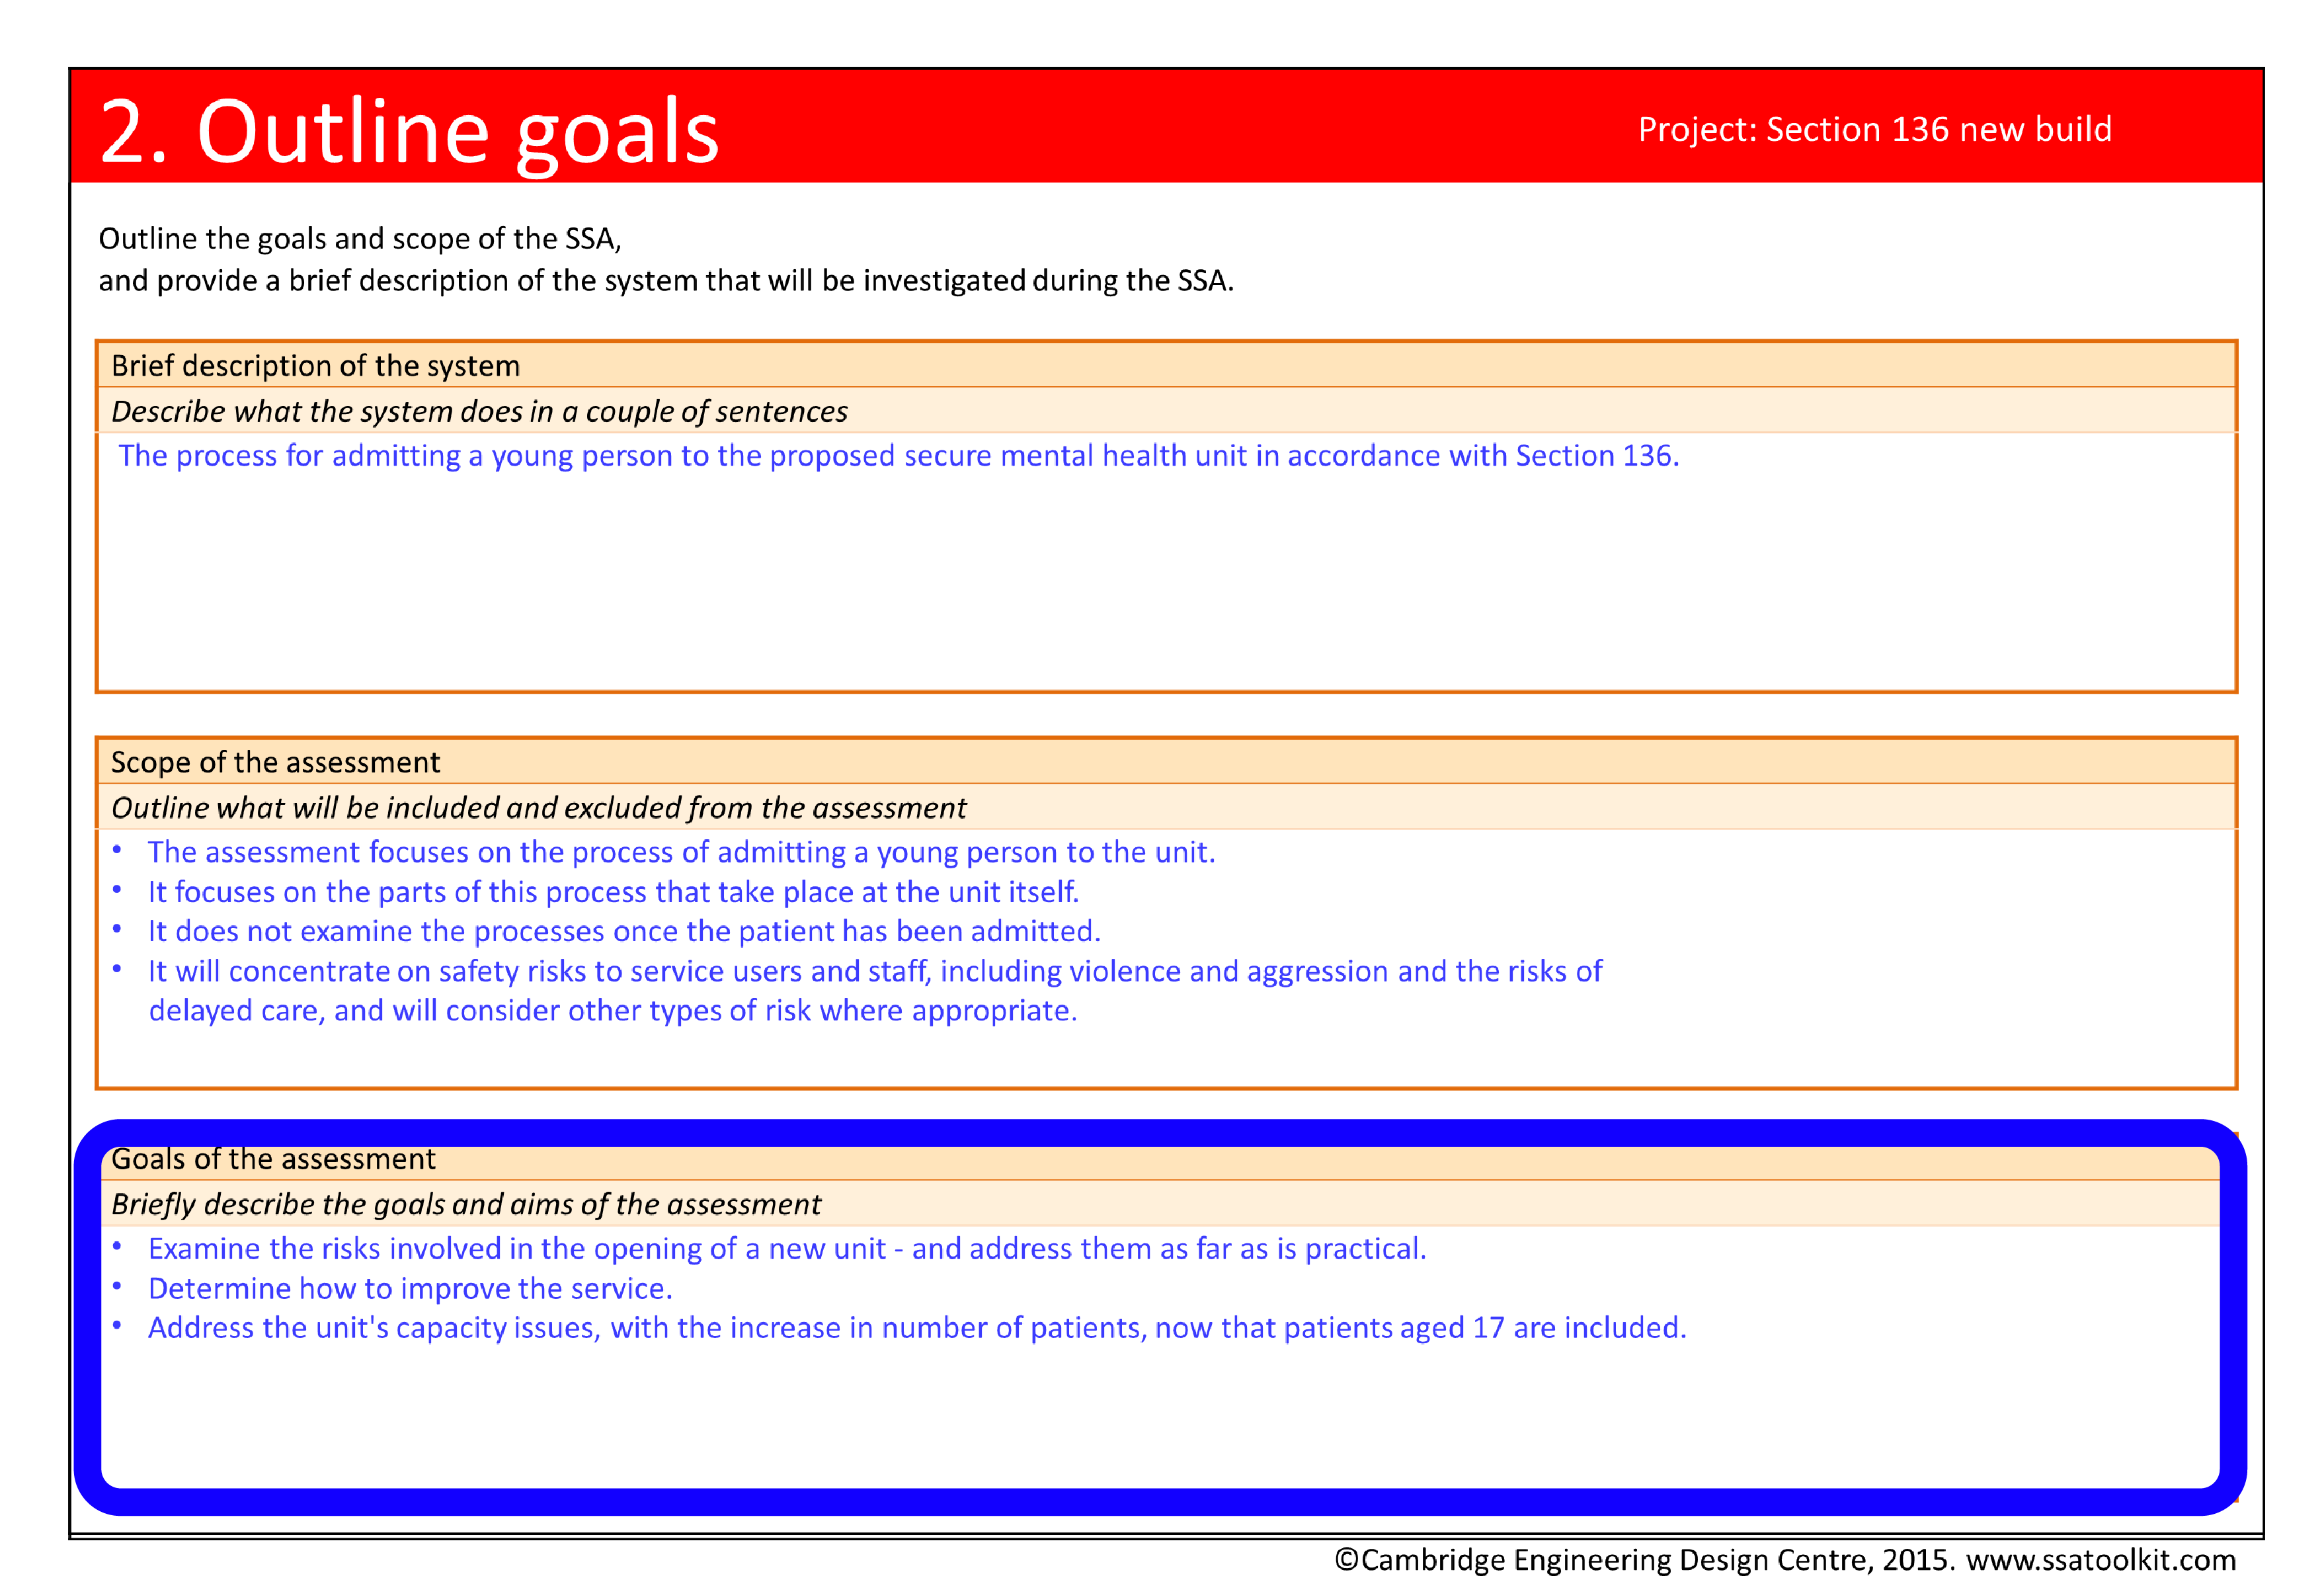 Screenshot of the Outline goals page from the Section 136 case study. The goals are circled. They are to examine the risks involved in the opening of a new unit and address them as far as is practical, to determine how to improve the service, and to address the unit's capacity issues, with the increase in number of patients, now that patients aged 17 are included. The full form in pdf is available from the Resources page.